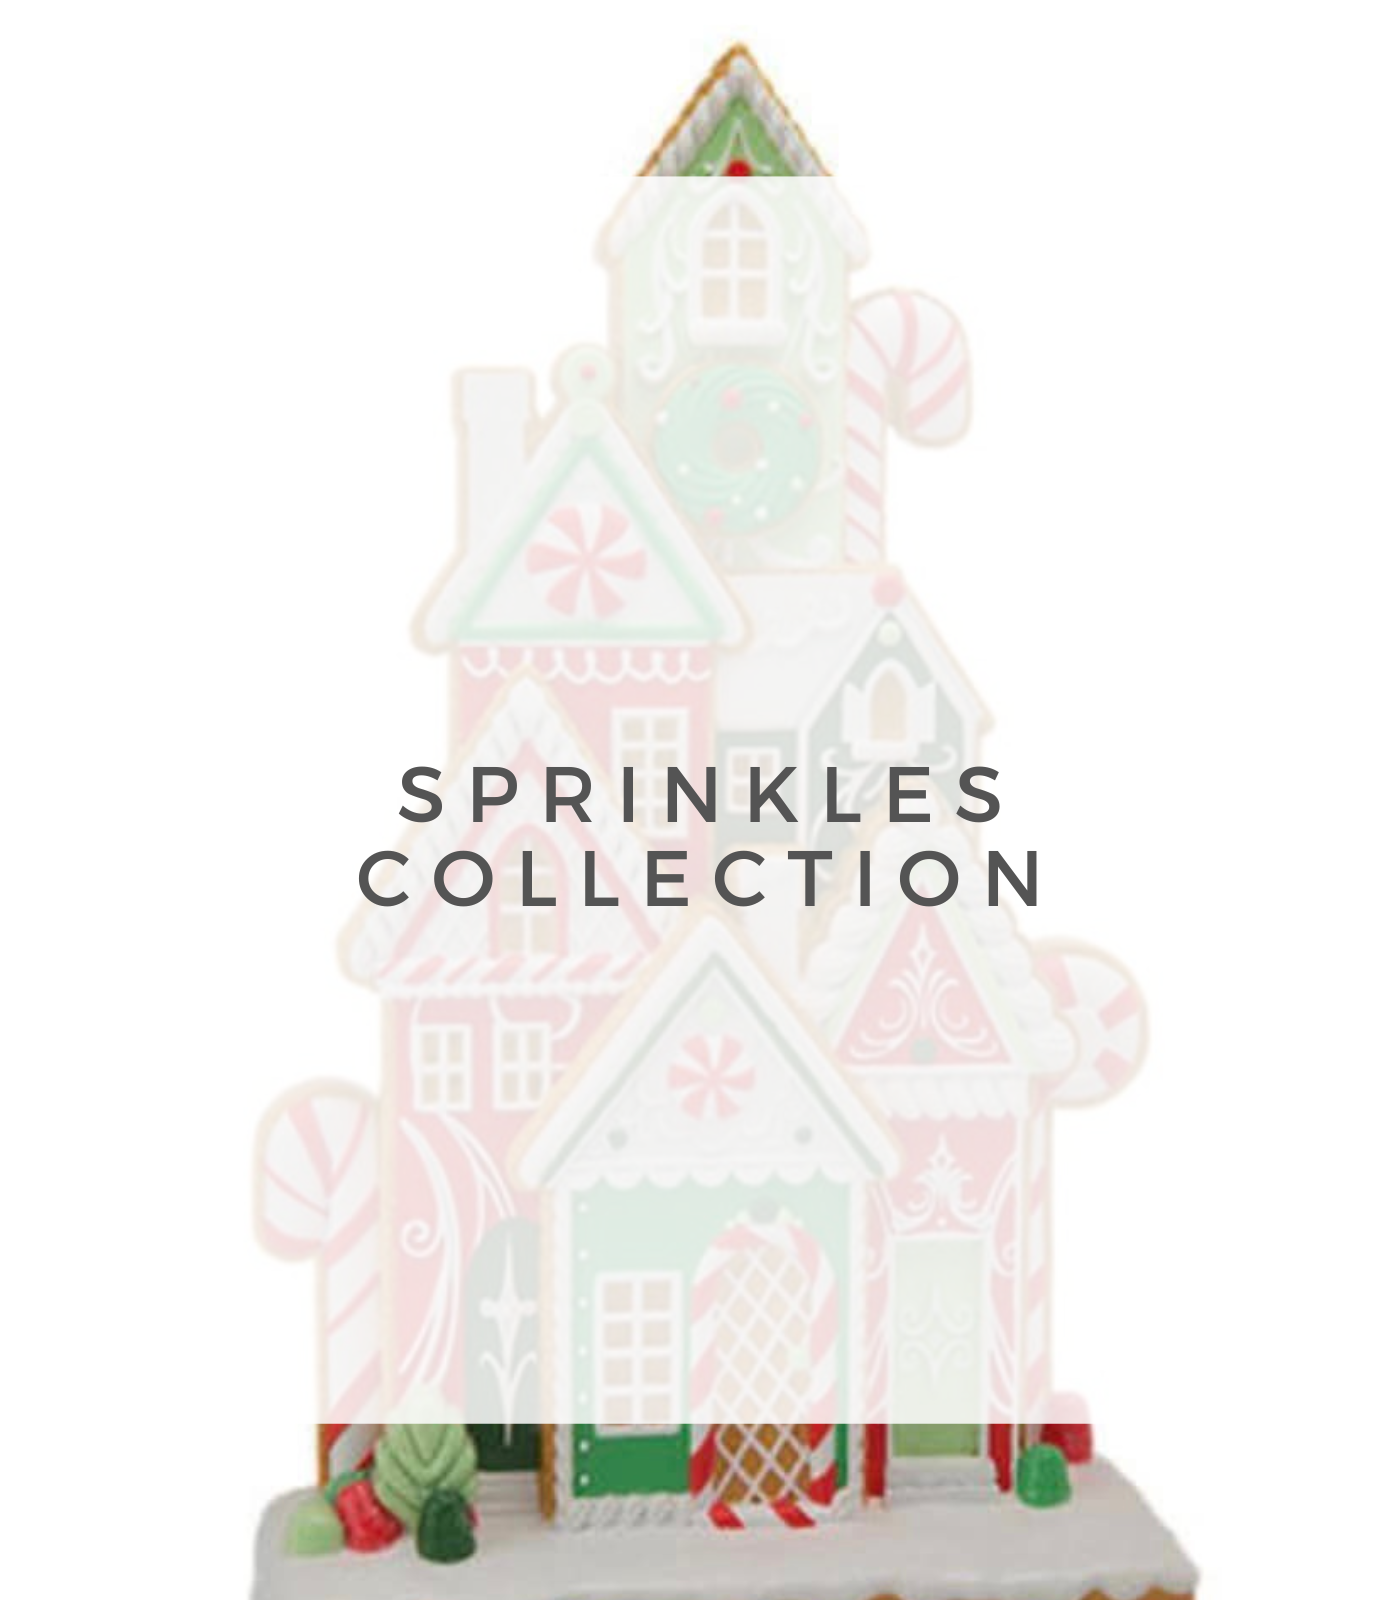 SPRINKLES COLLECTION